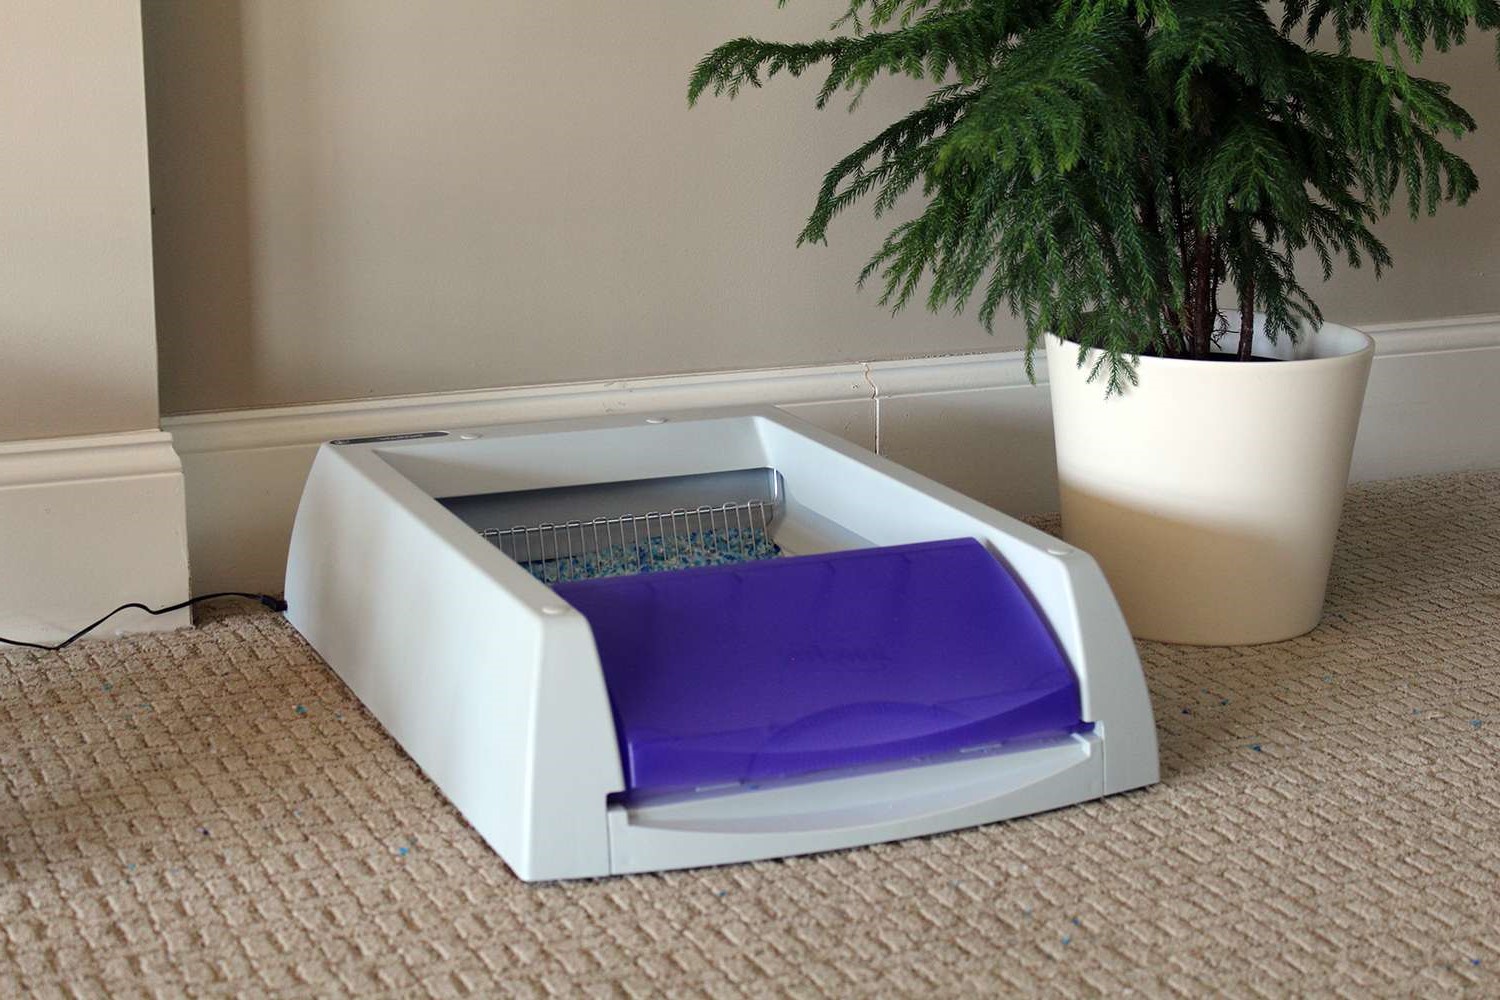 How Does Scoopfree Litter Box Work?